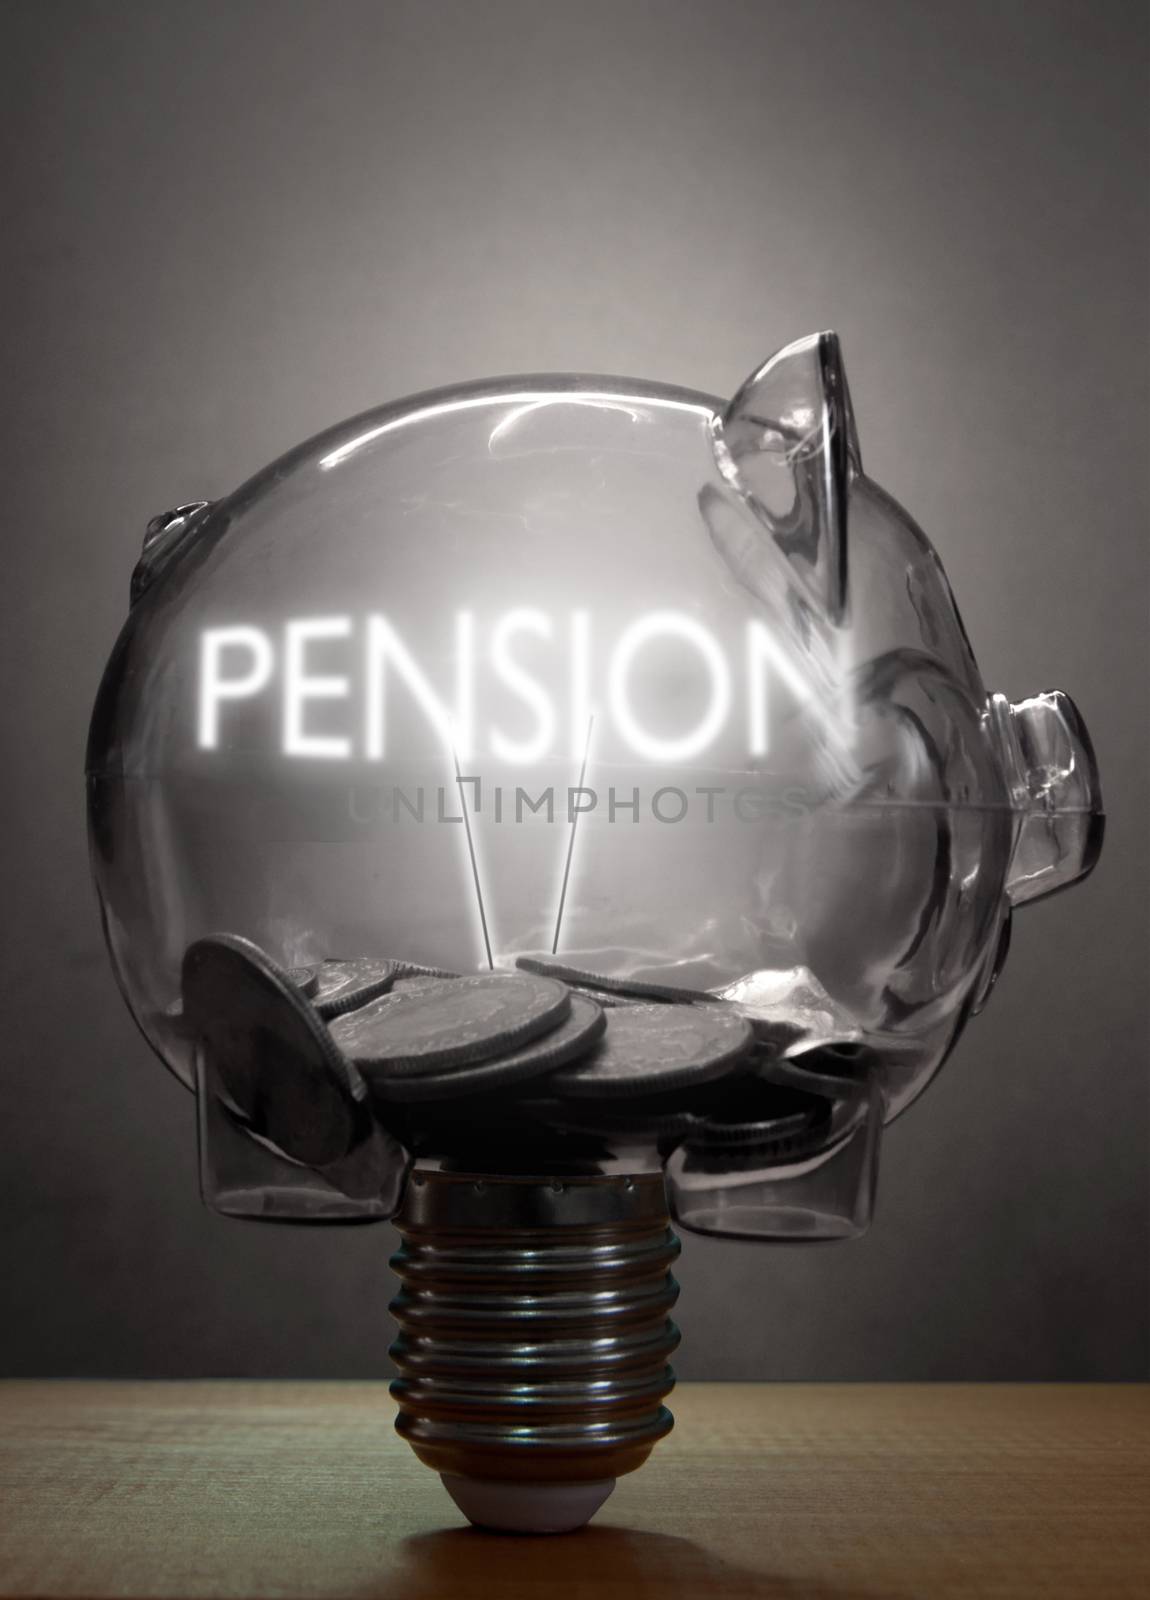 Piggybank light bulb with pension lit text inside and cash